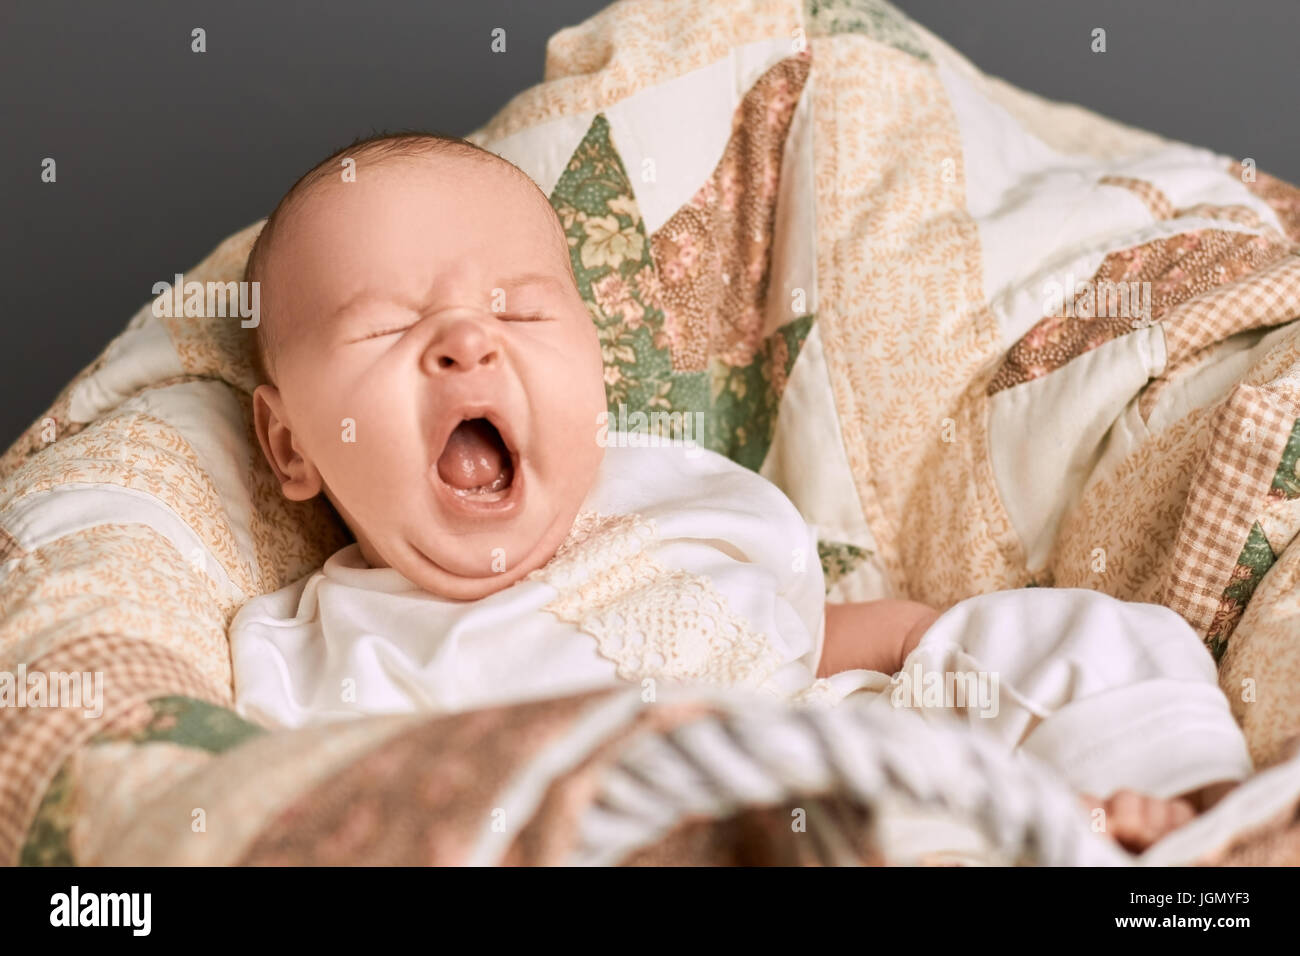 Yawn of an infant. Baby with mouth open. Facts about yawning. Stock Photo